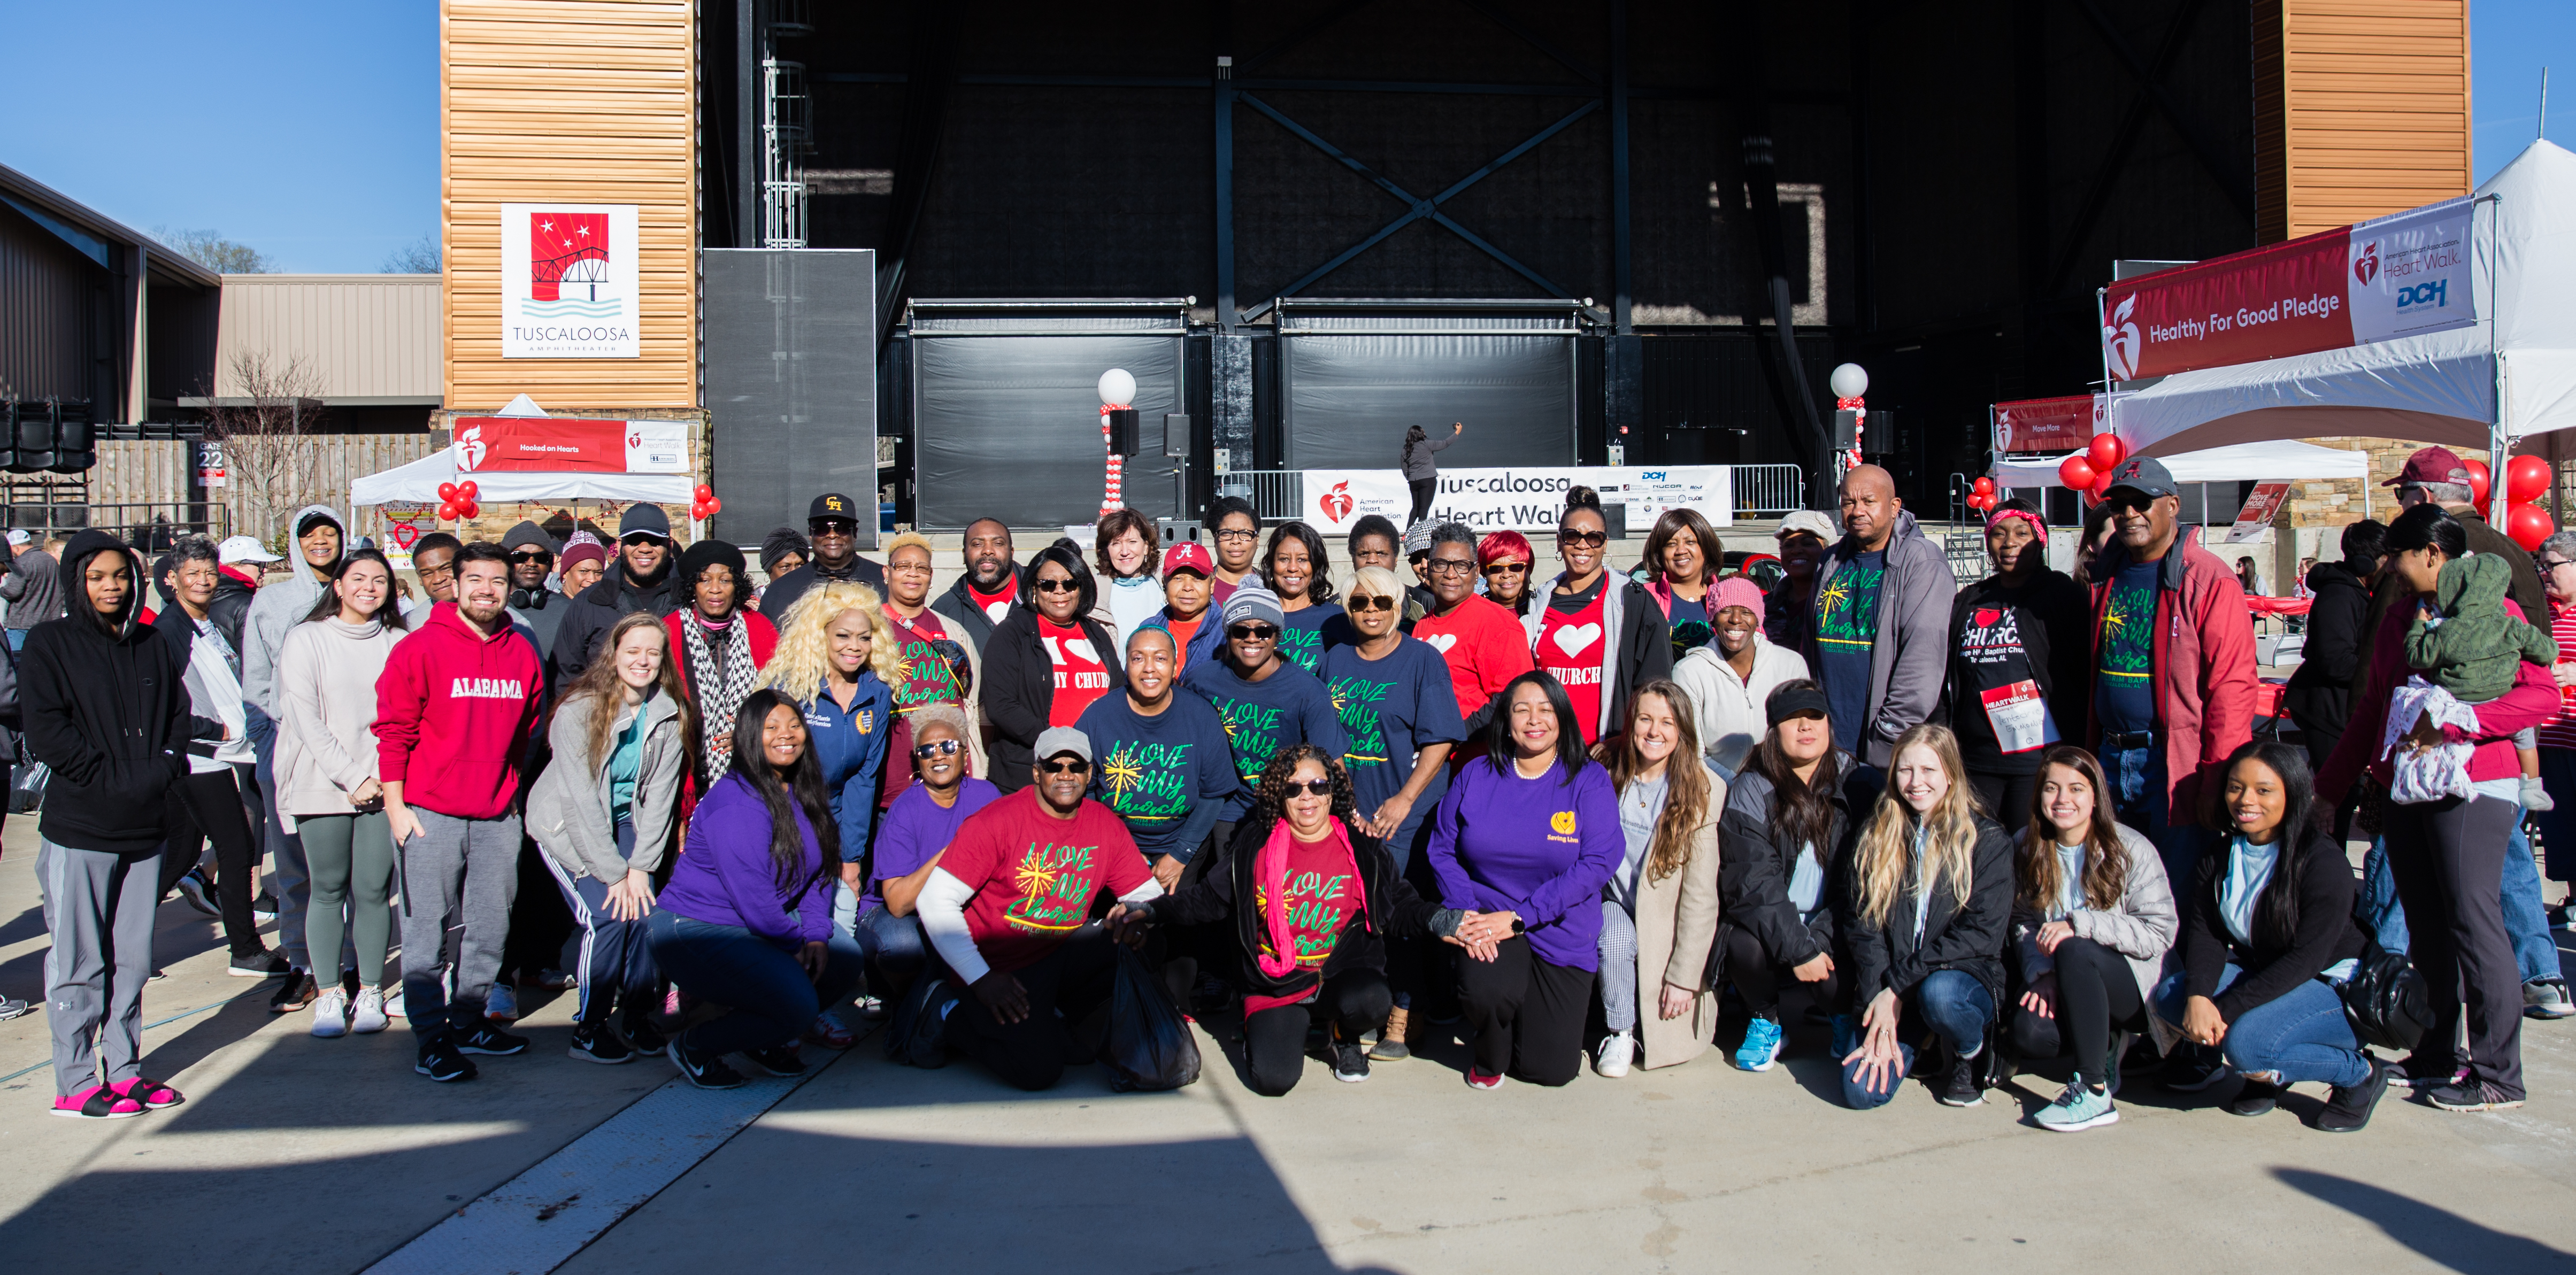 Members of the Saving Lives network pose with UA student organizations during the 2020 Tuscaloosa Heart Walk.